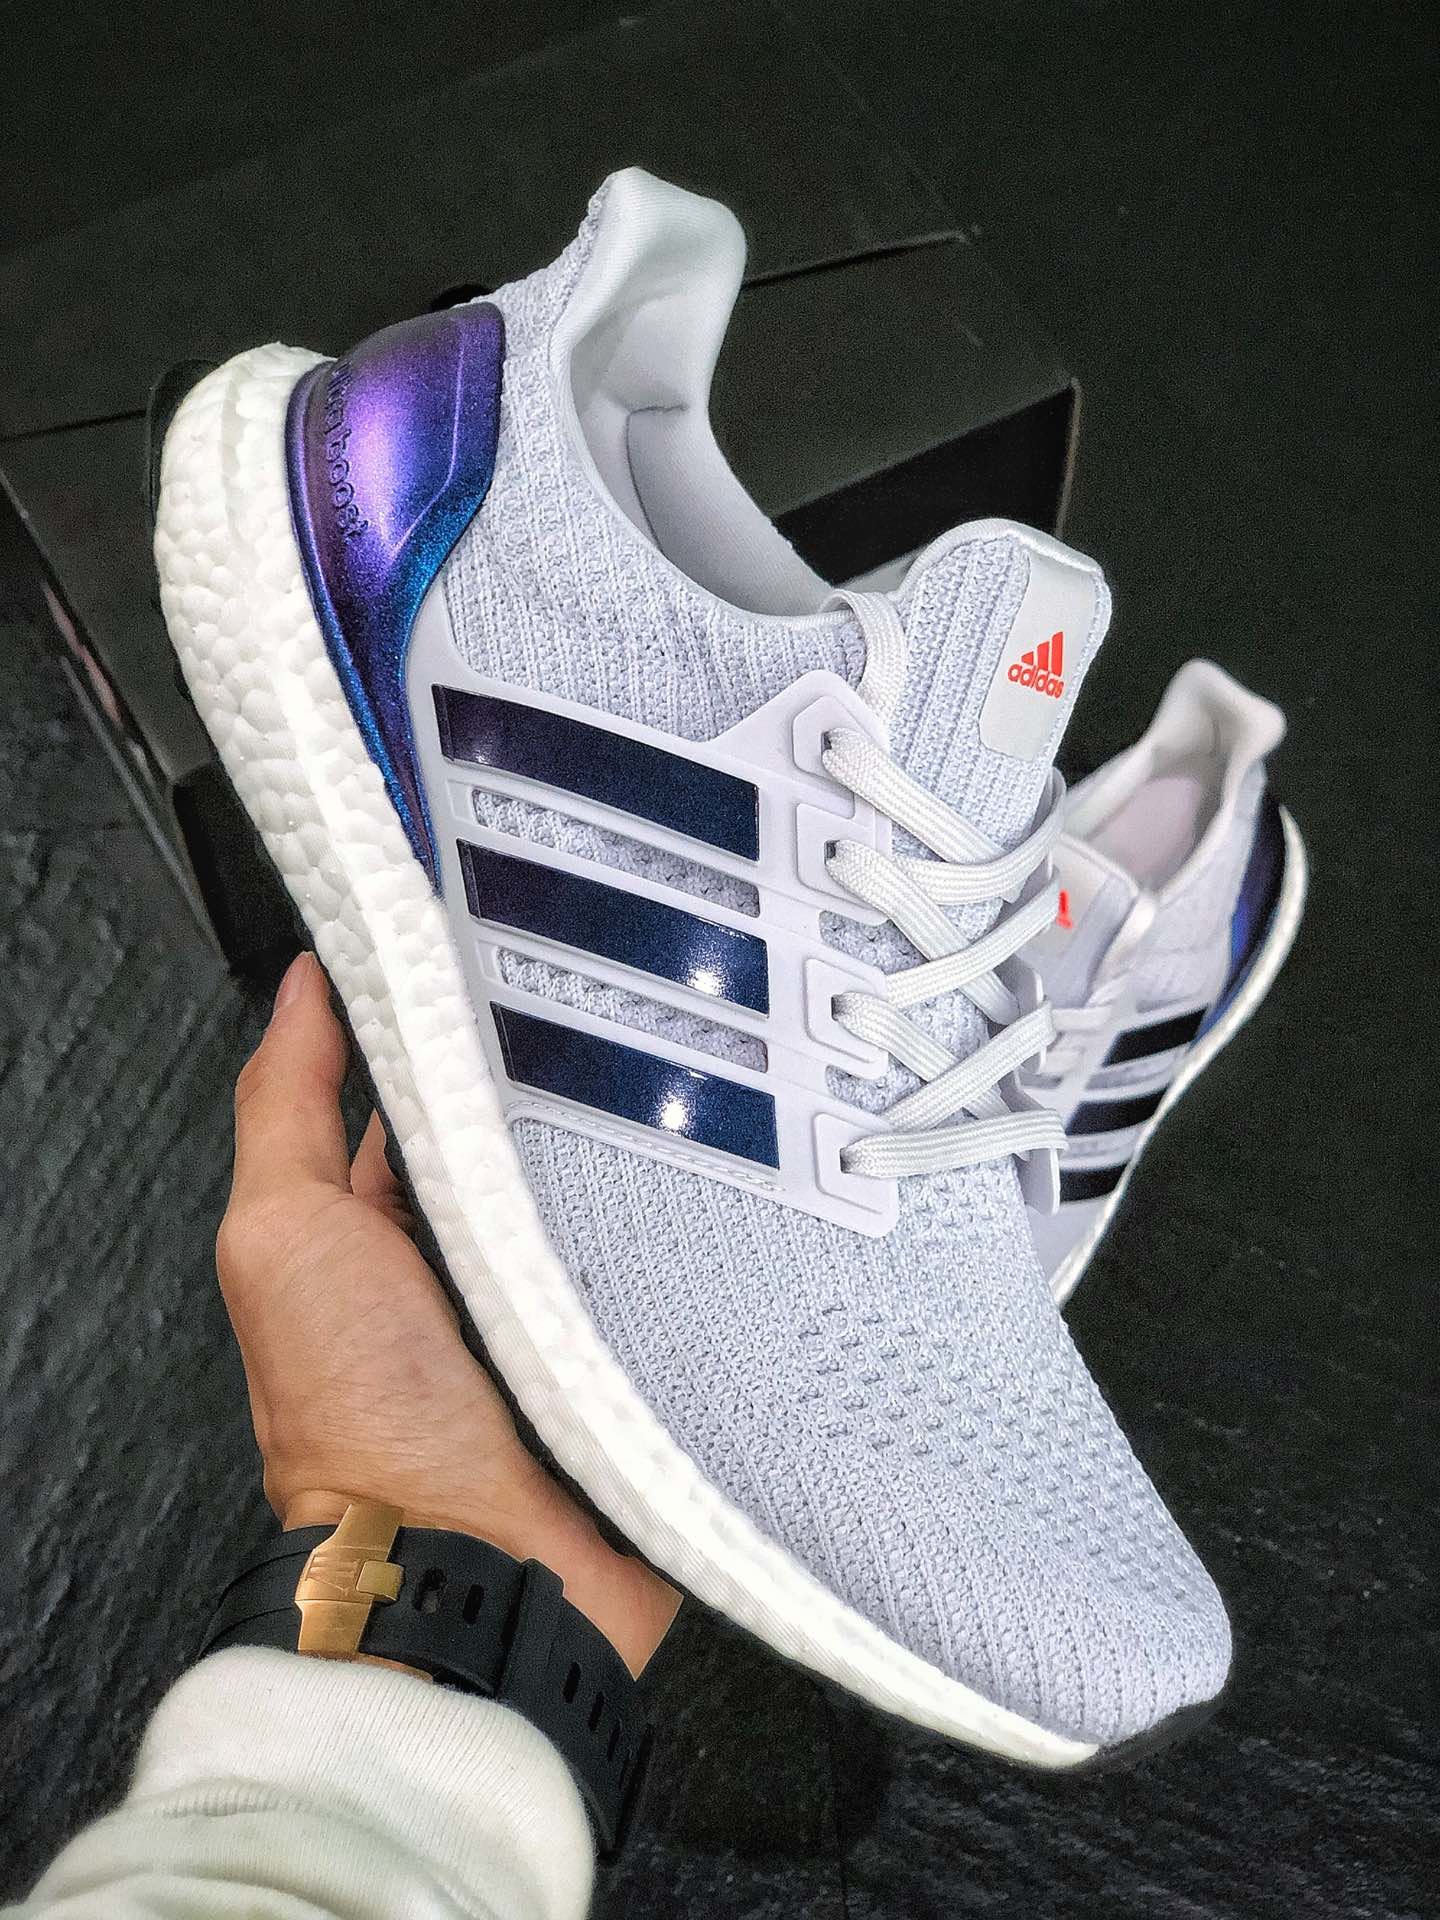 adidas ultra boost mens shoes